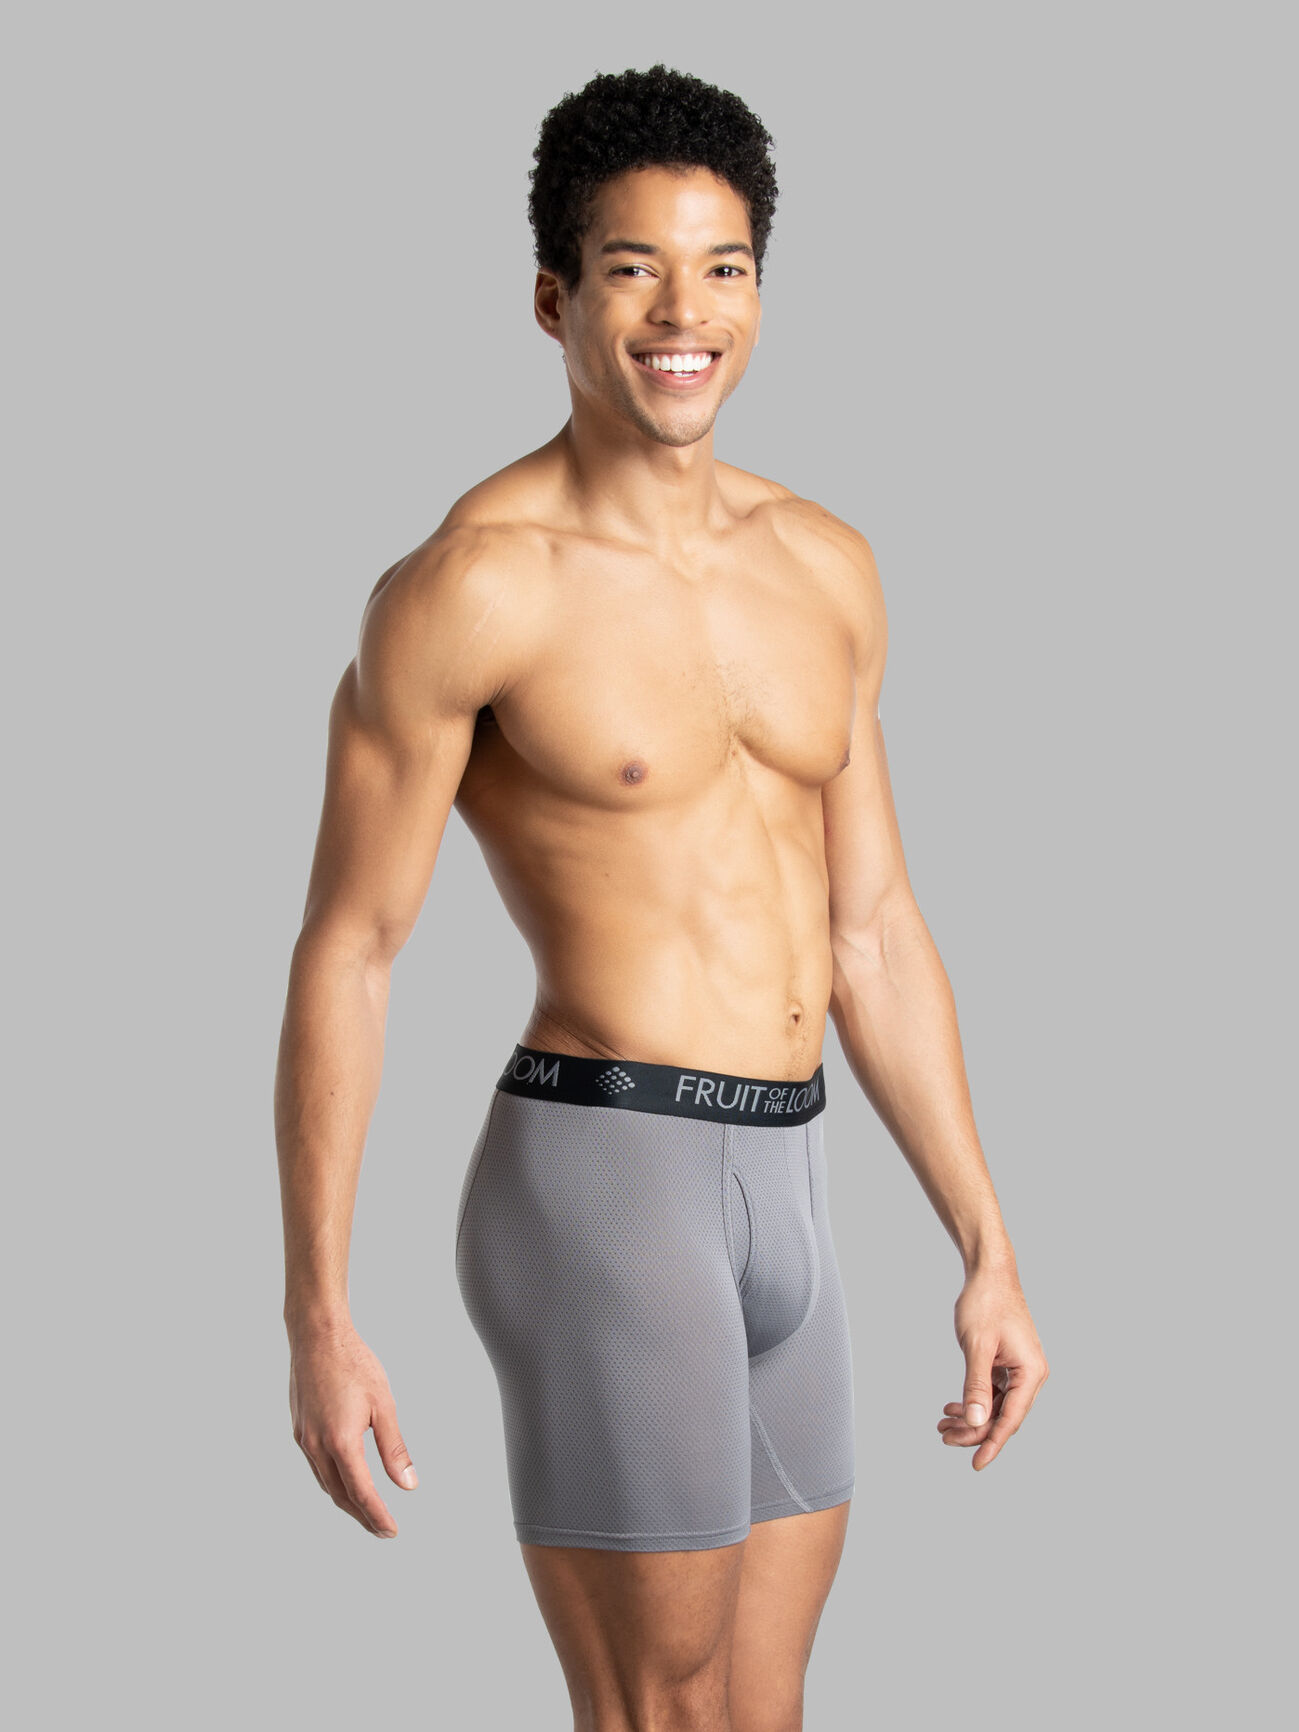 Your favorite Micro Stretch underwear, updated in cooling mesh for